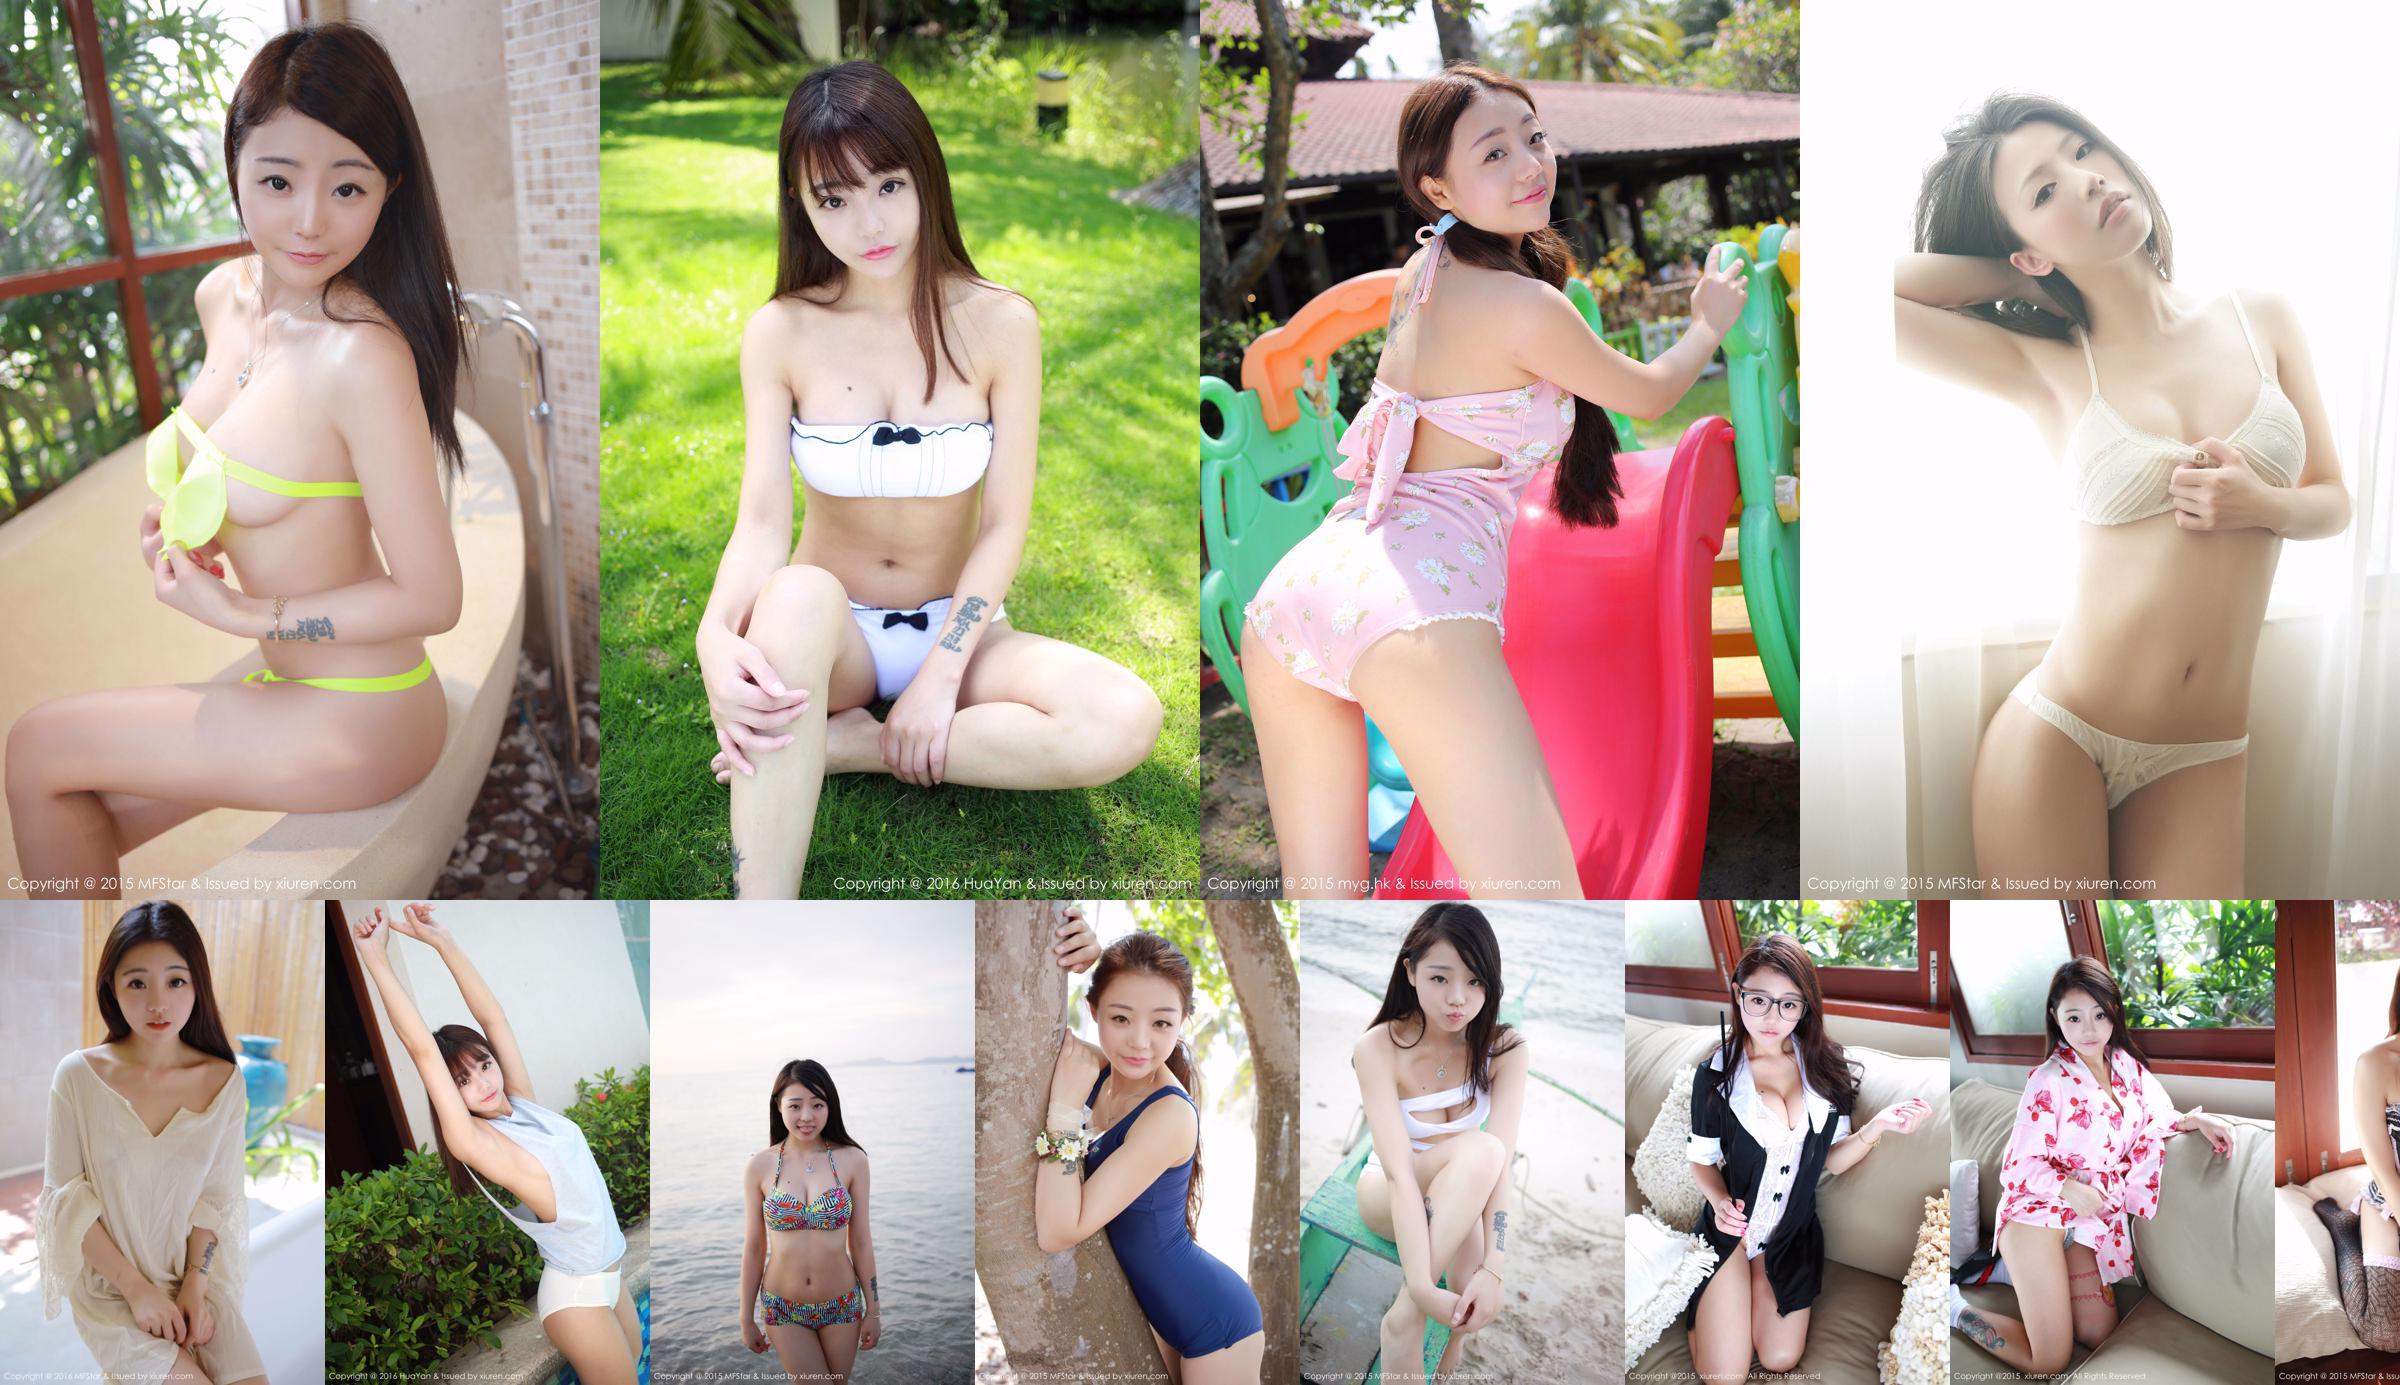 She Bella Bella "Lombok Travel Shooting" Swimsuit Girl Outdoor Shoot [美媛館MyGirl] Vol.149 No.2e5c51 Page 1